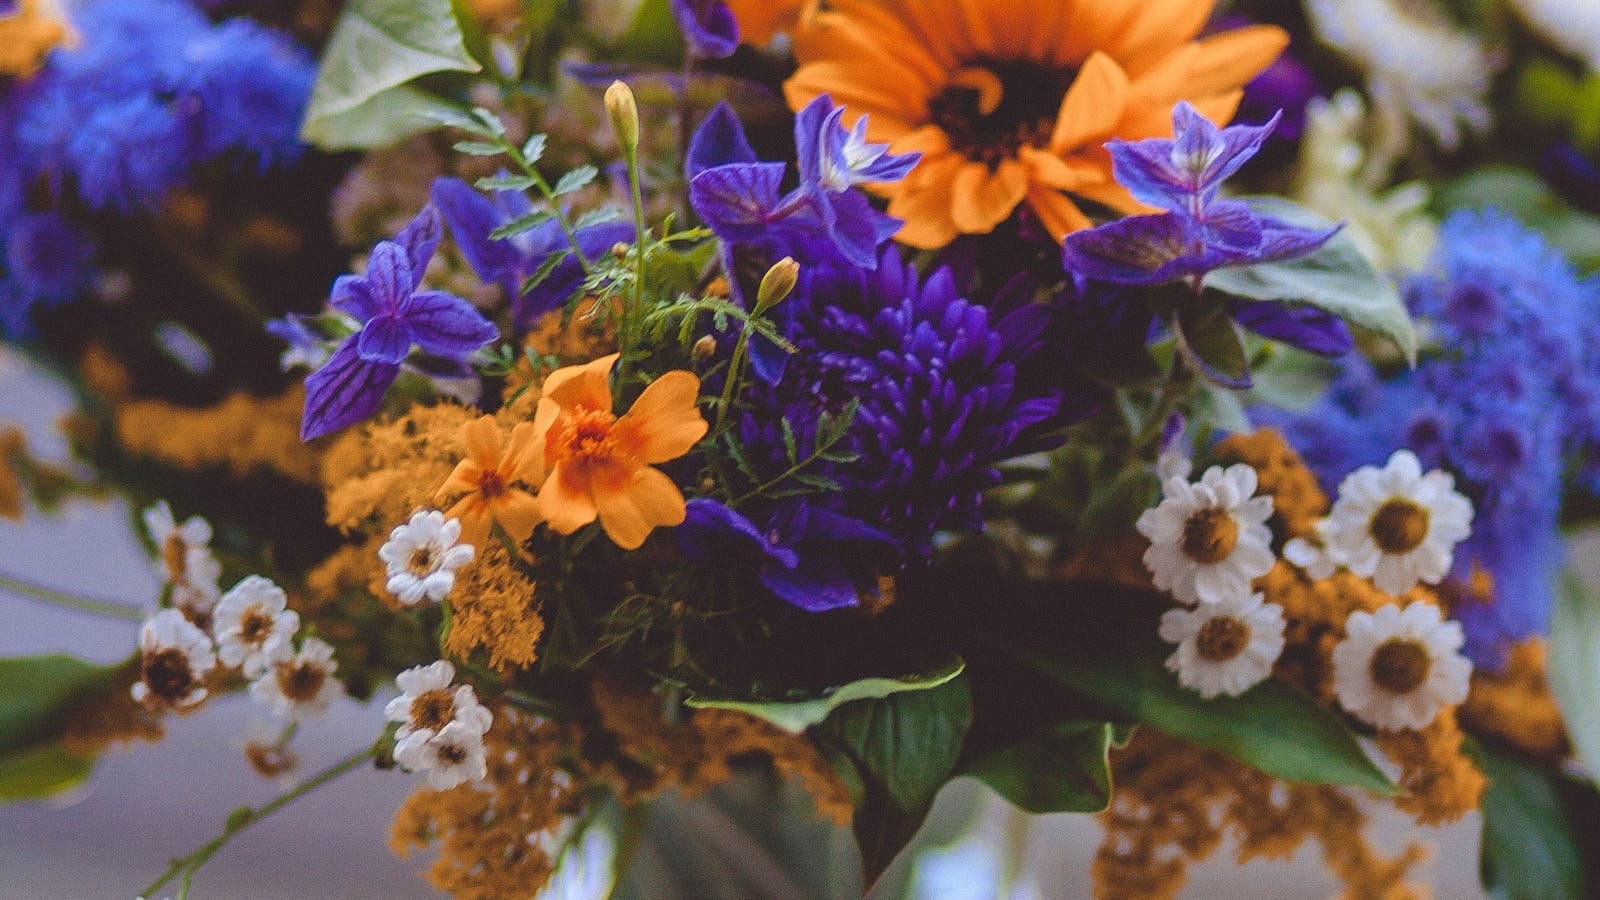 Image for Flower Arranging with Seasonal Flowers